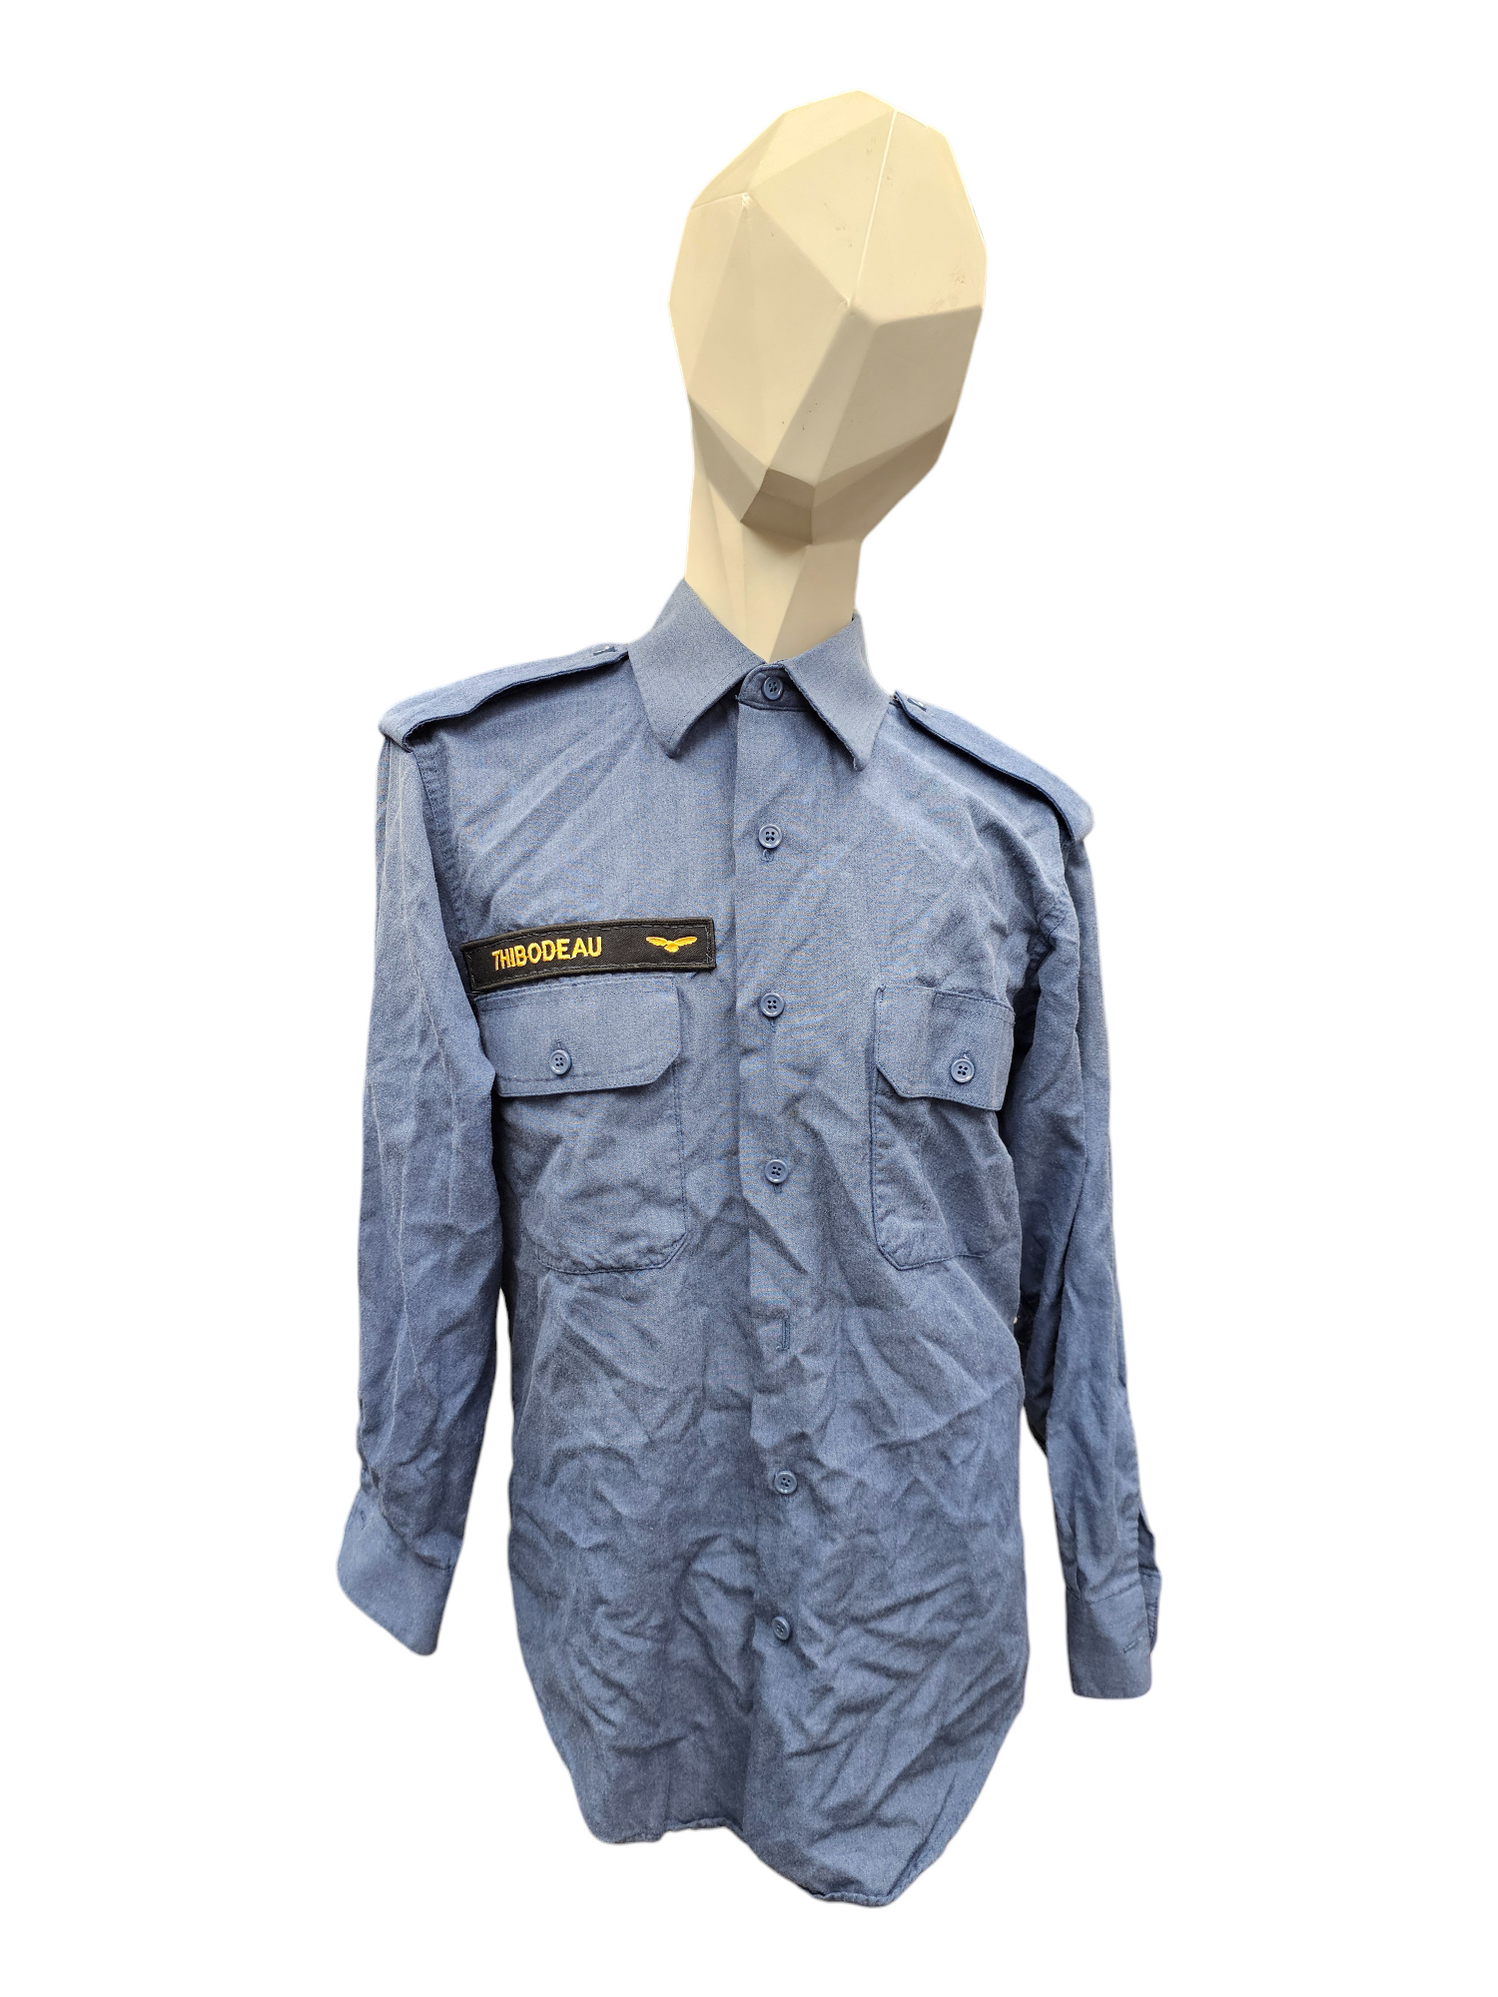 Canadian Armed Forces Airforce Long Sleeve Work Shirt